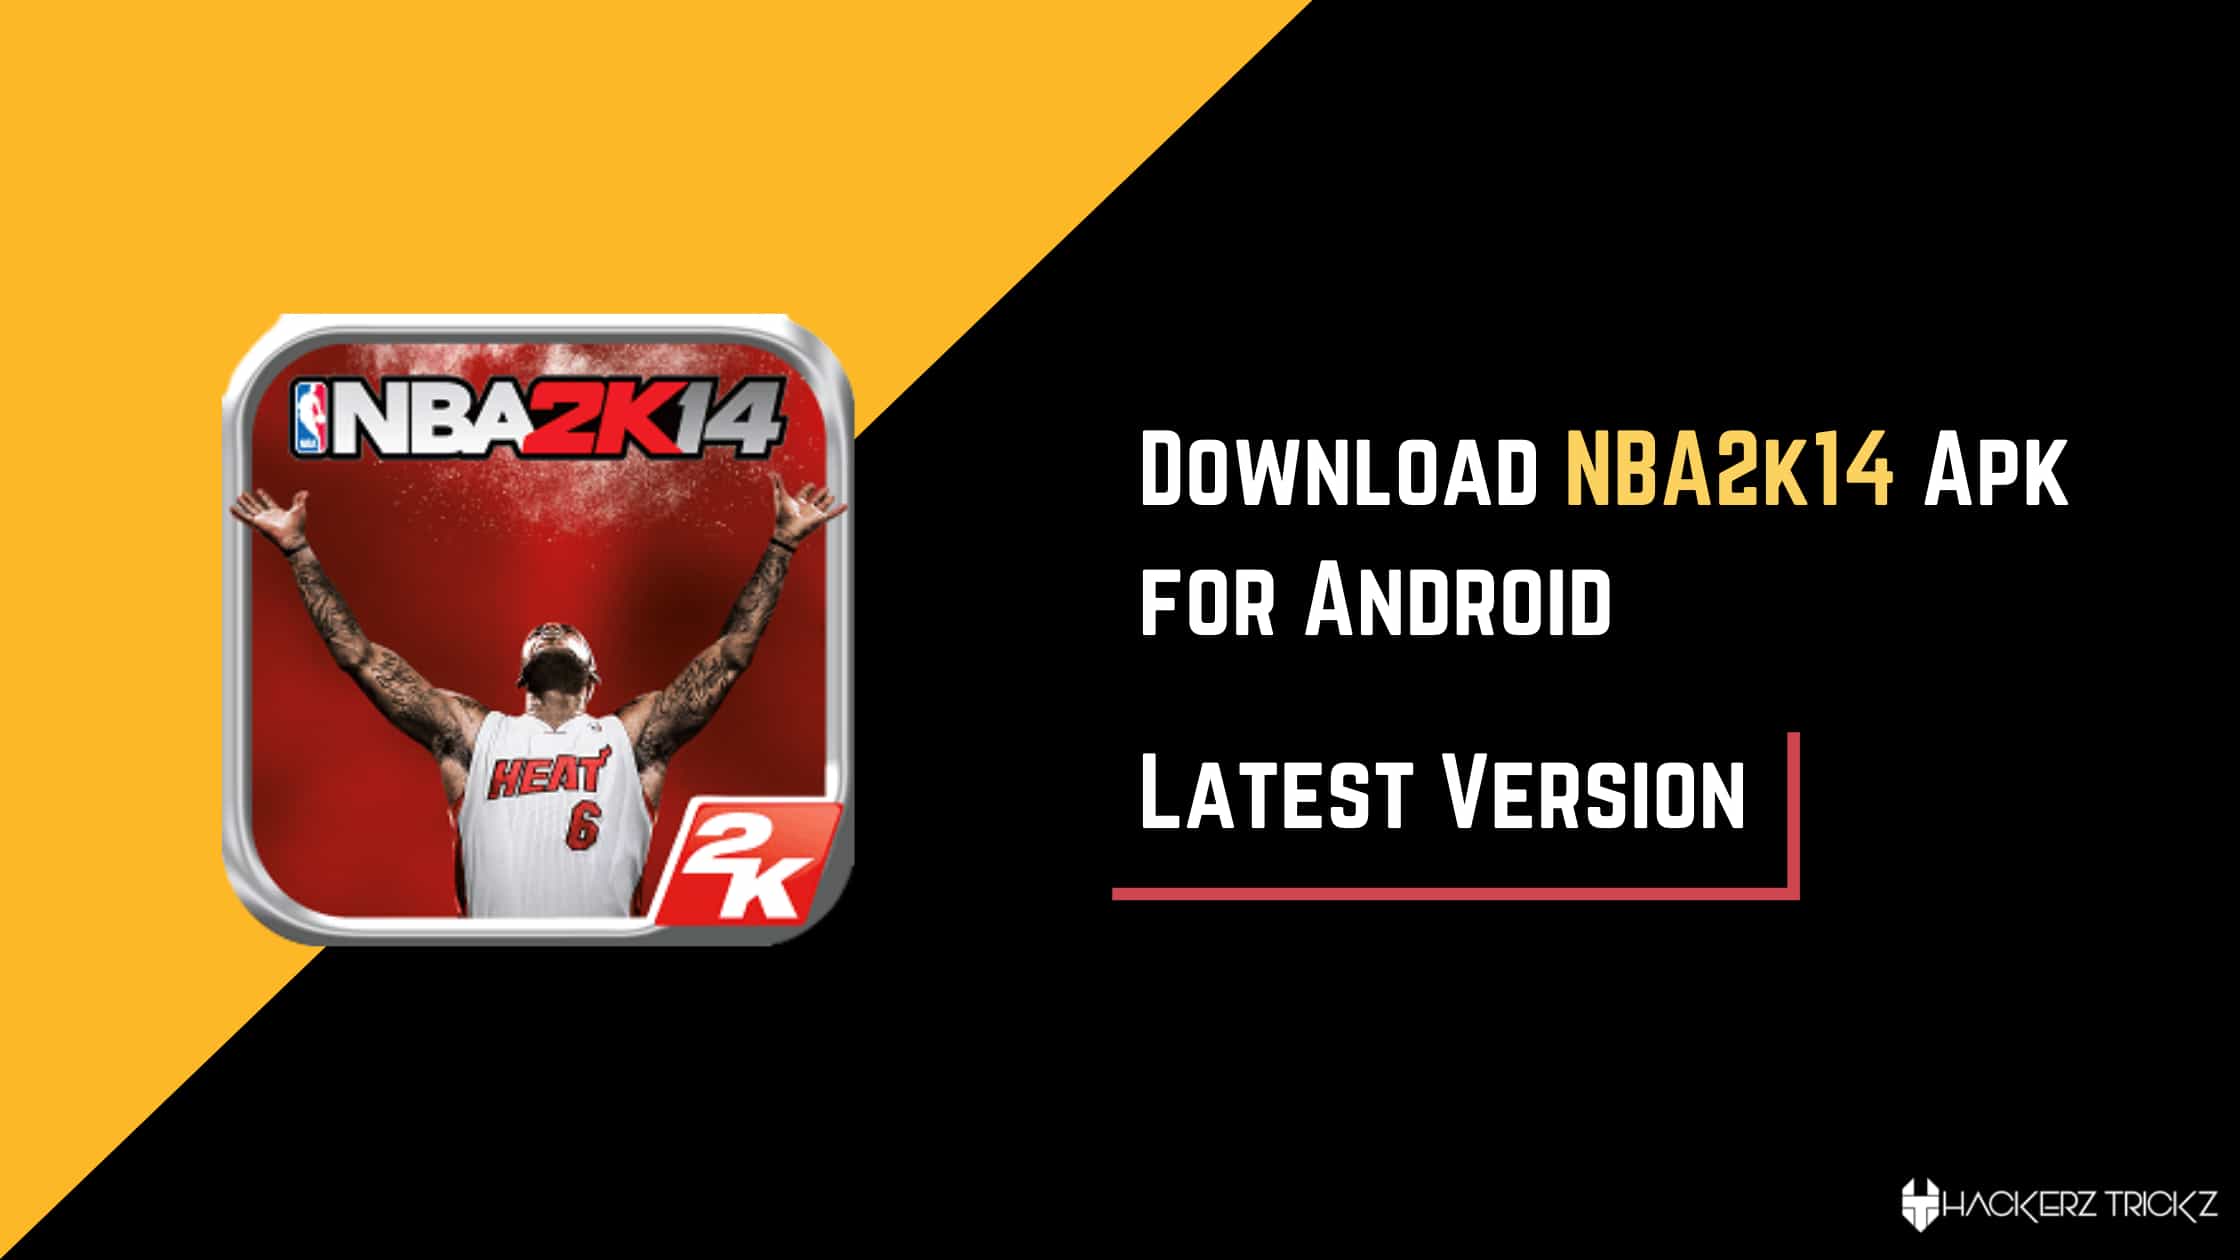 Download NBA2k14 Apk for Android Latest Version